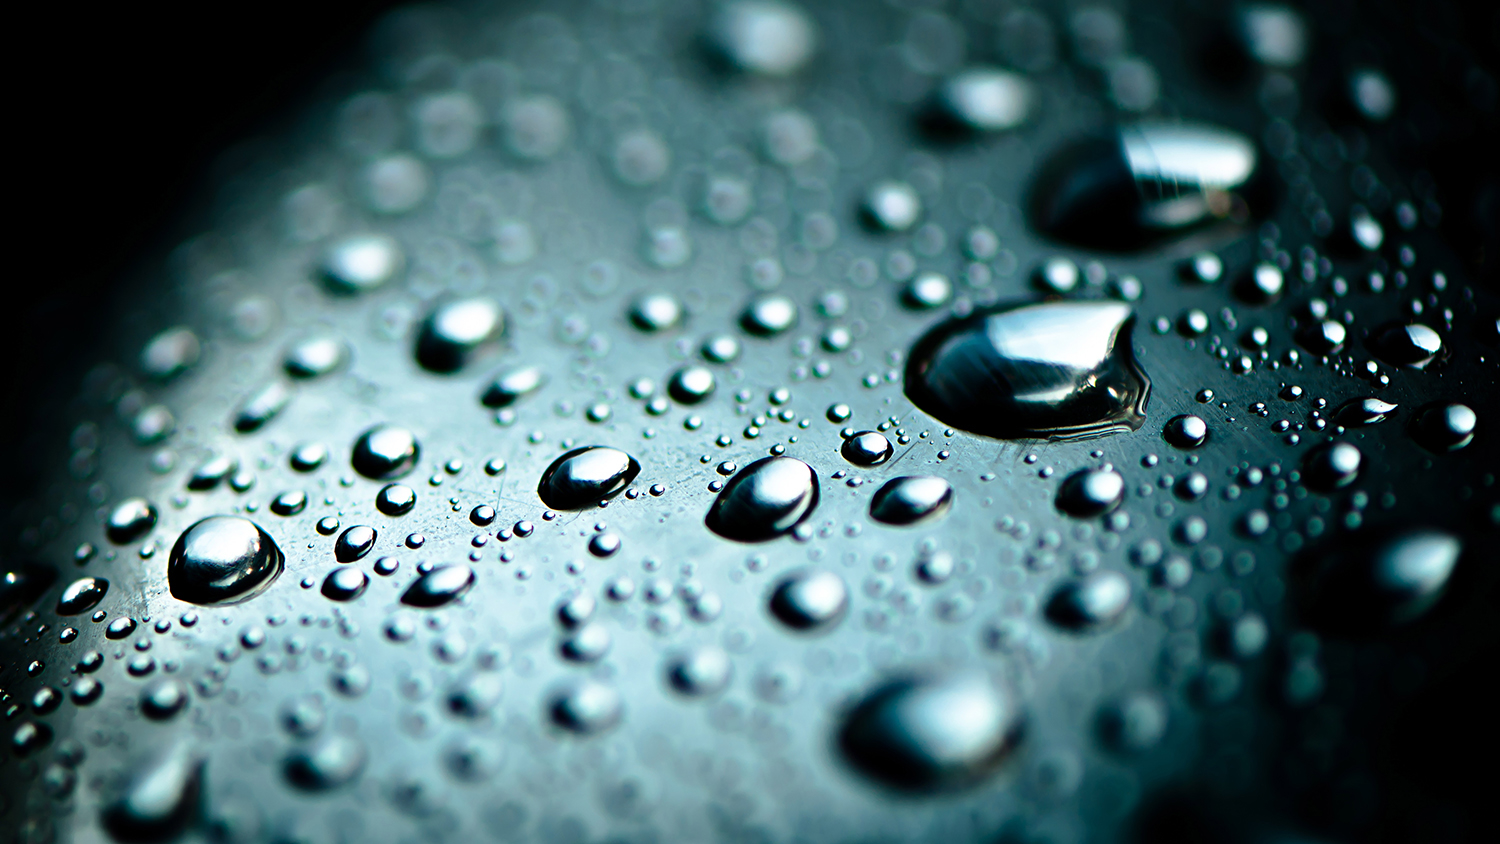 water droplets on a reflective surface